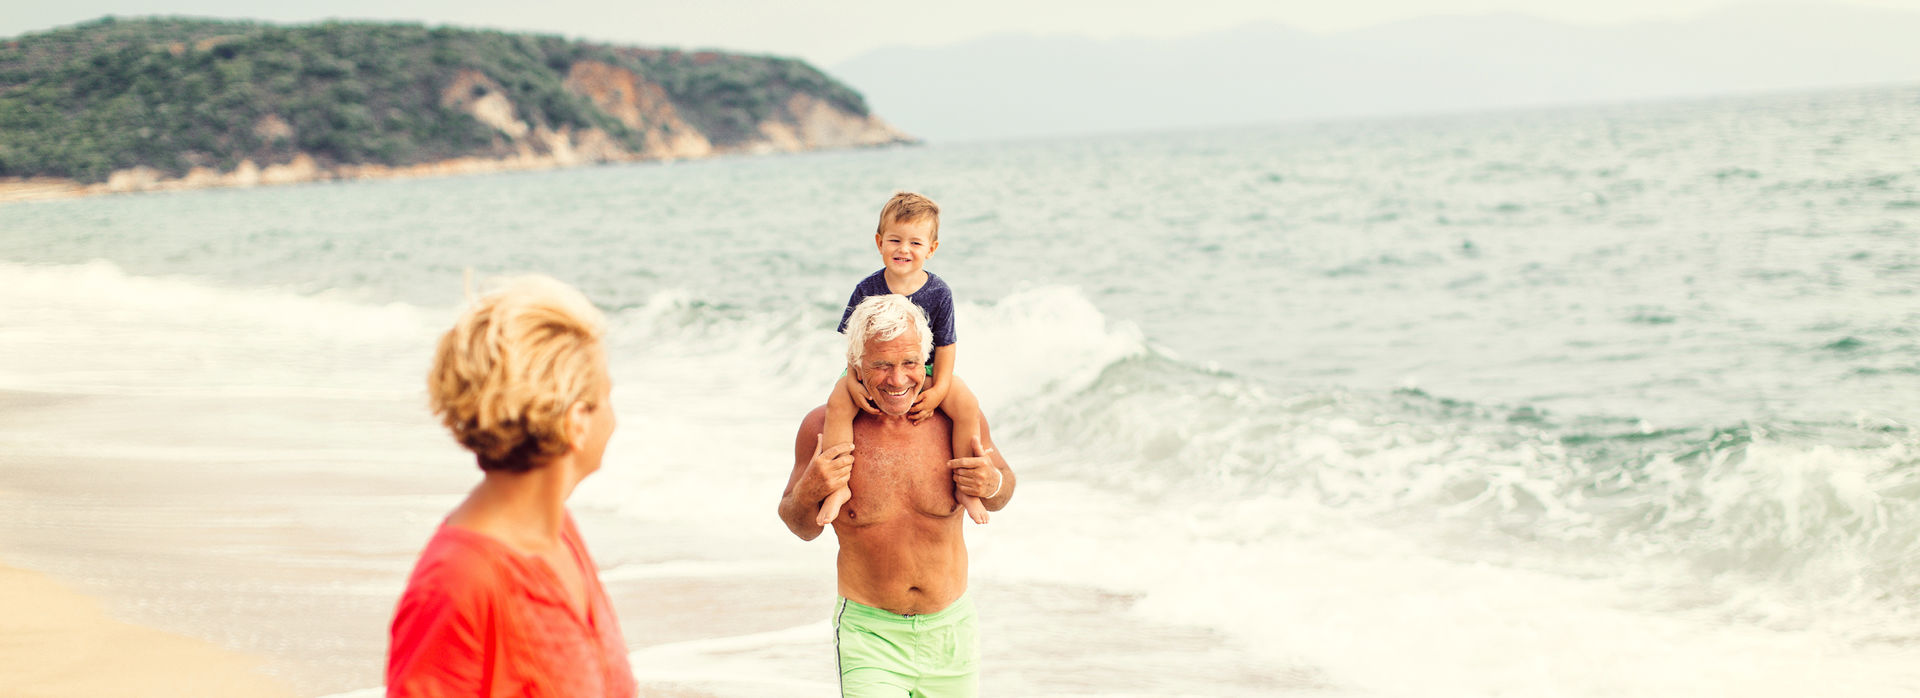 Places to travel with your grandchildren